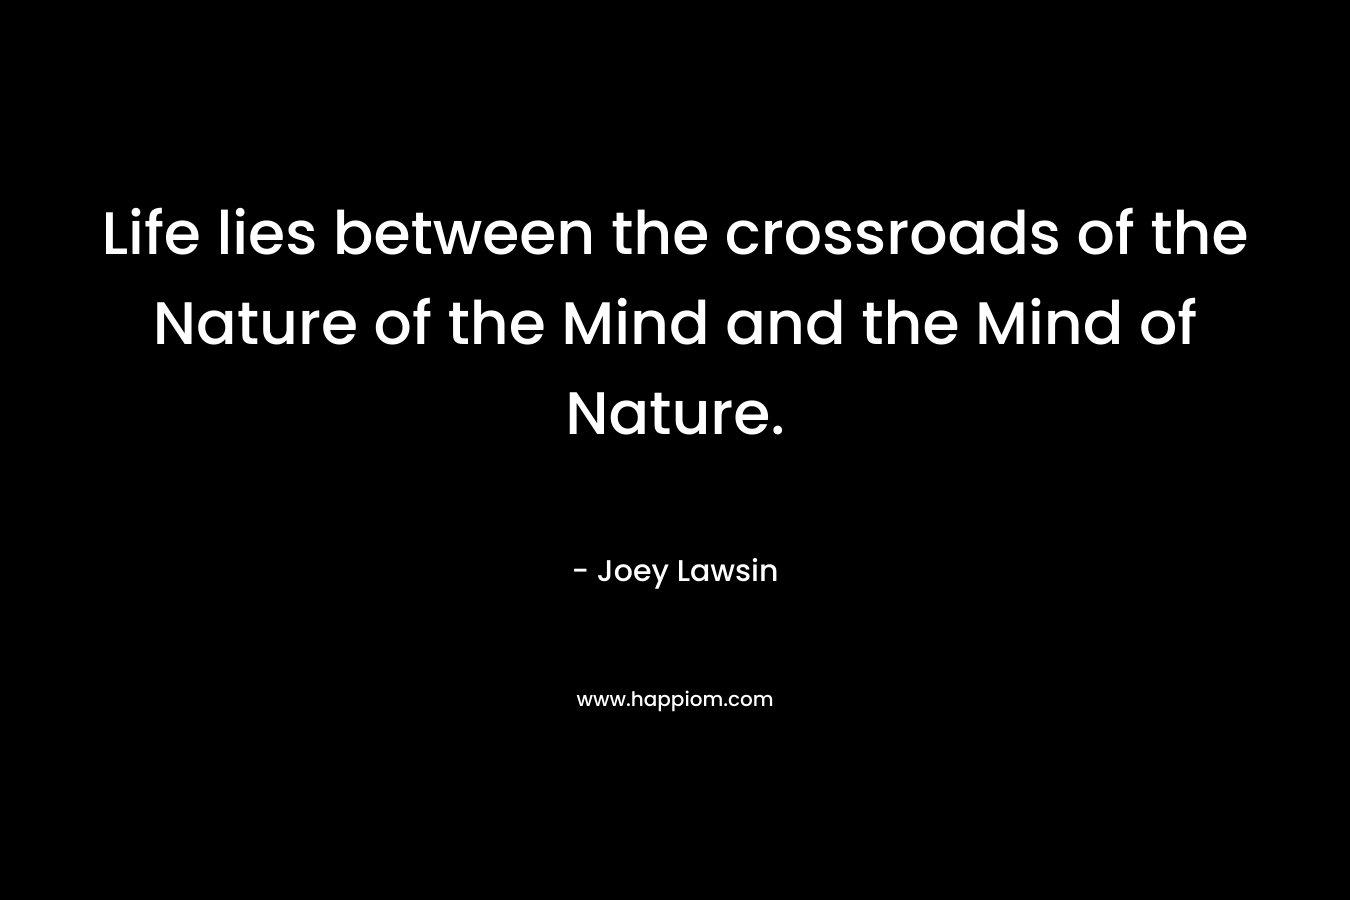 Life lies between the crossroads of the Nature of the Mind and the Mind of Nature. – Joey Lawsin